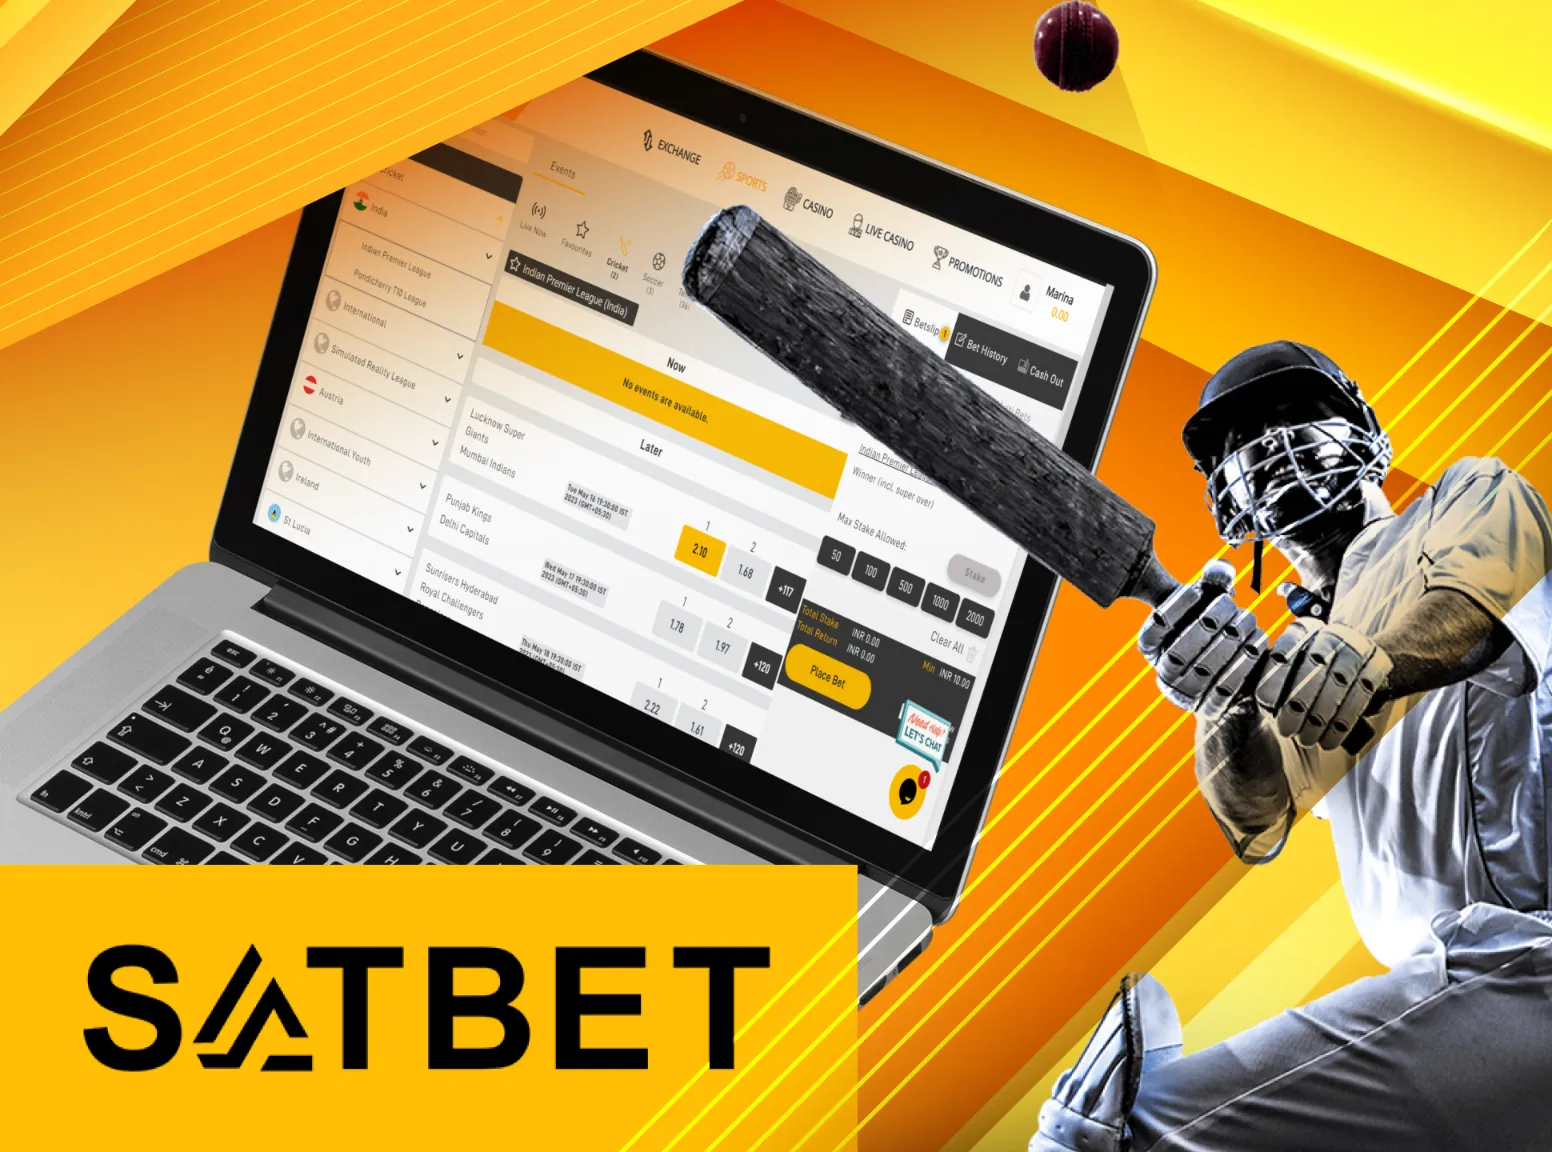 Bet on cricket teams at Satbet and watch their games.